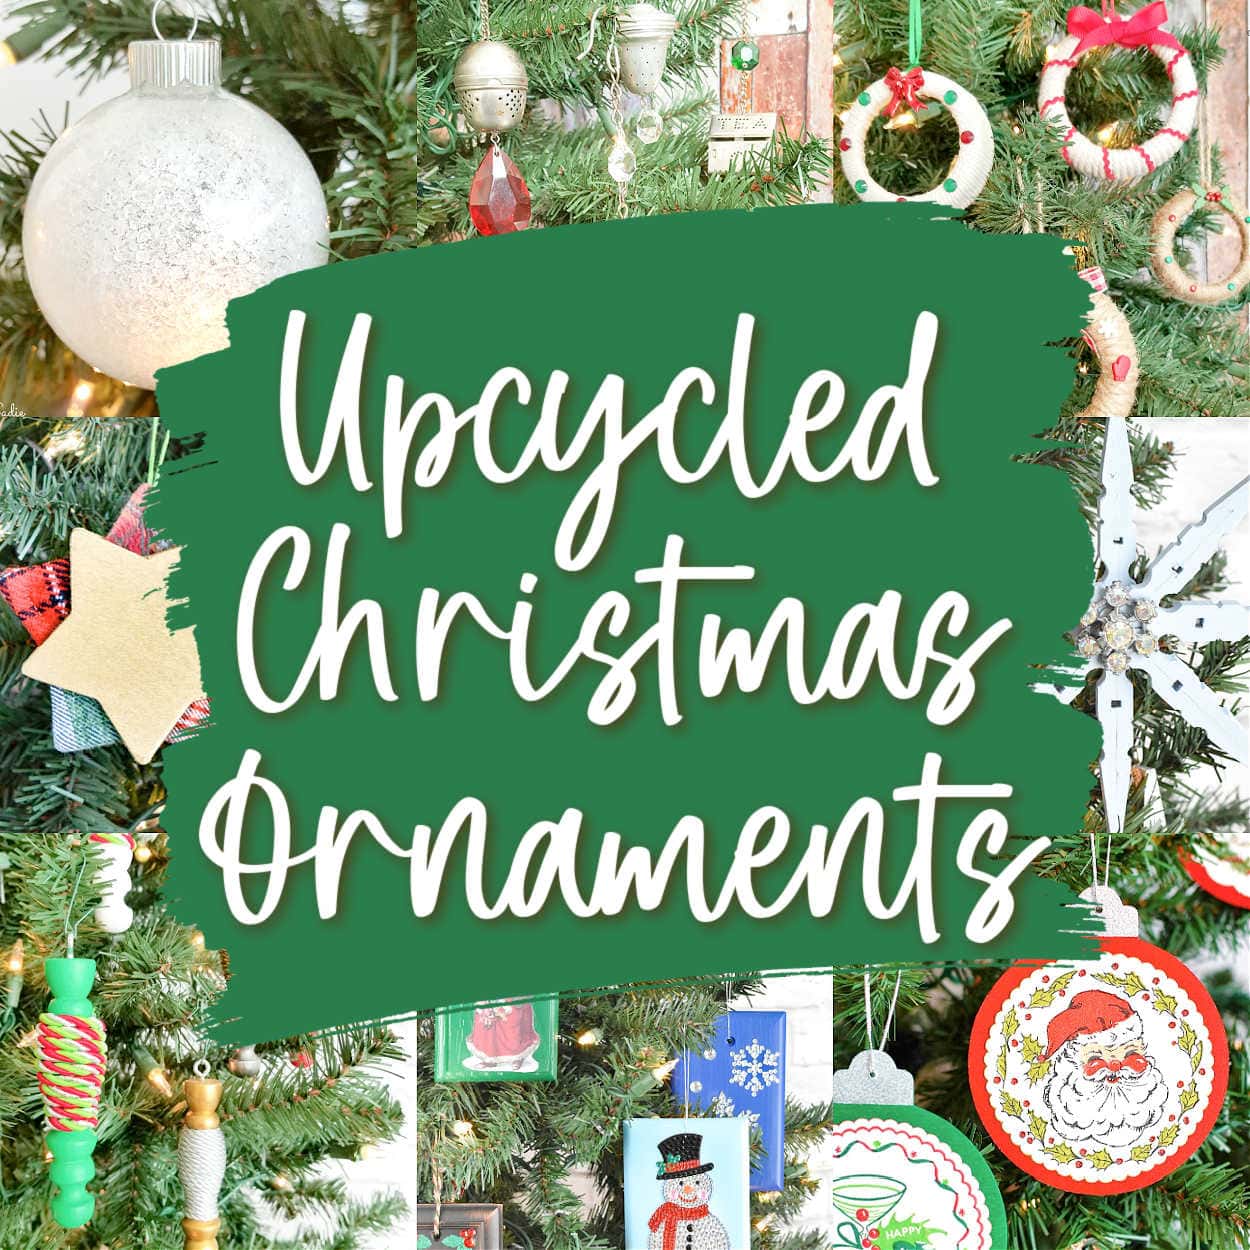 repurposed ornaments and christmas ornament craft ideas